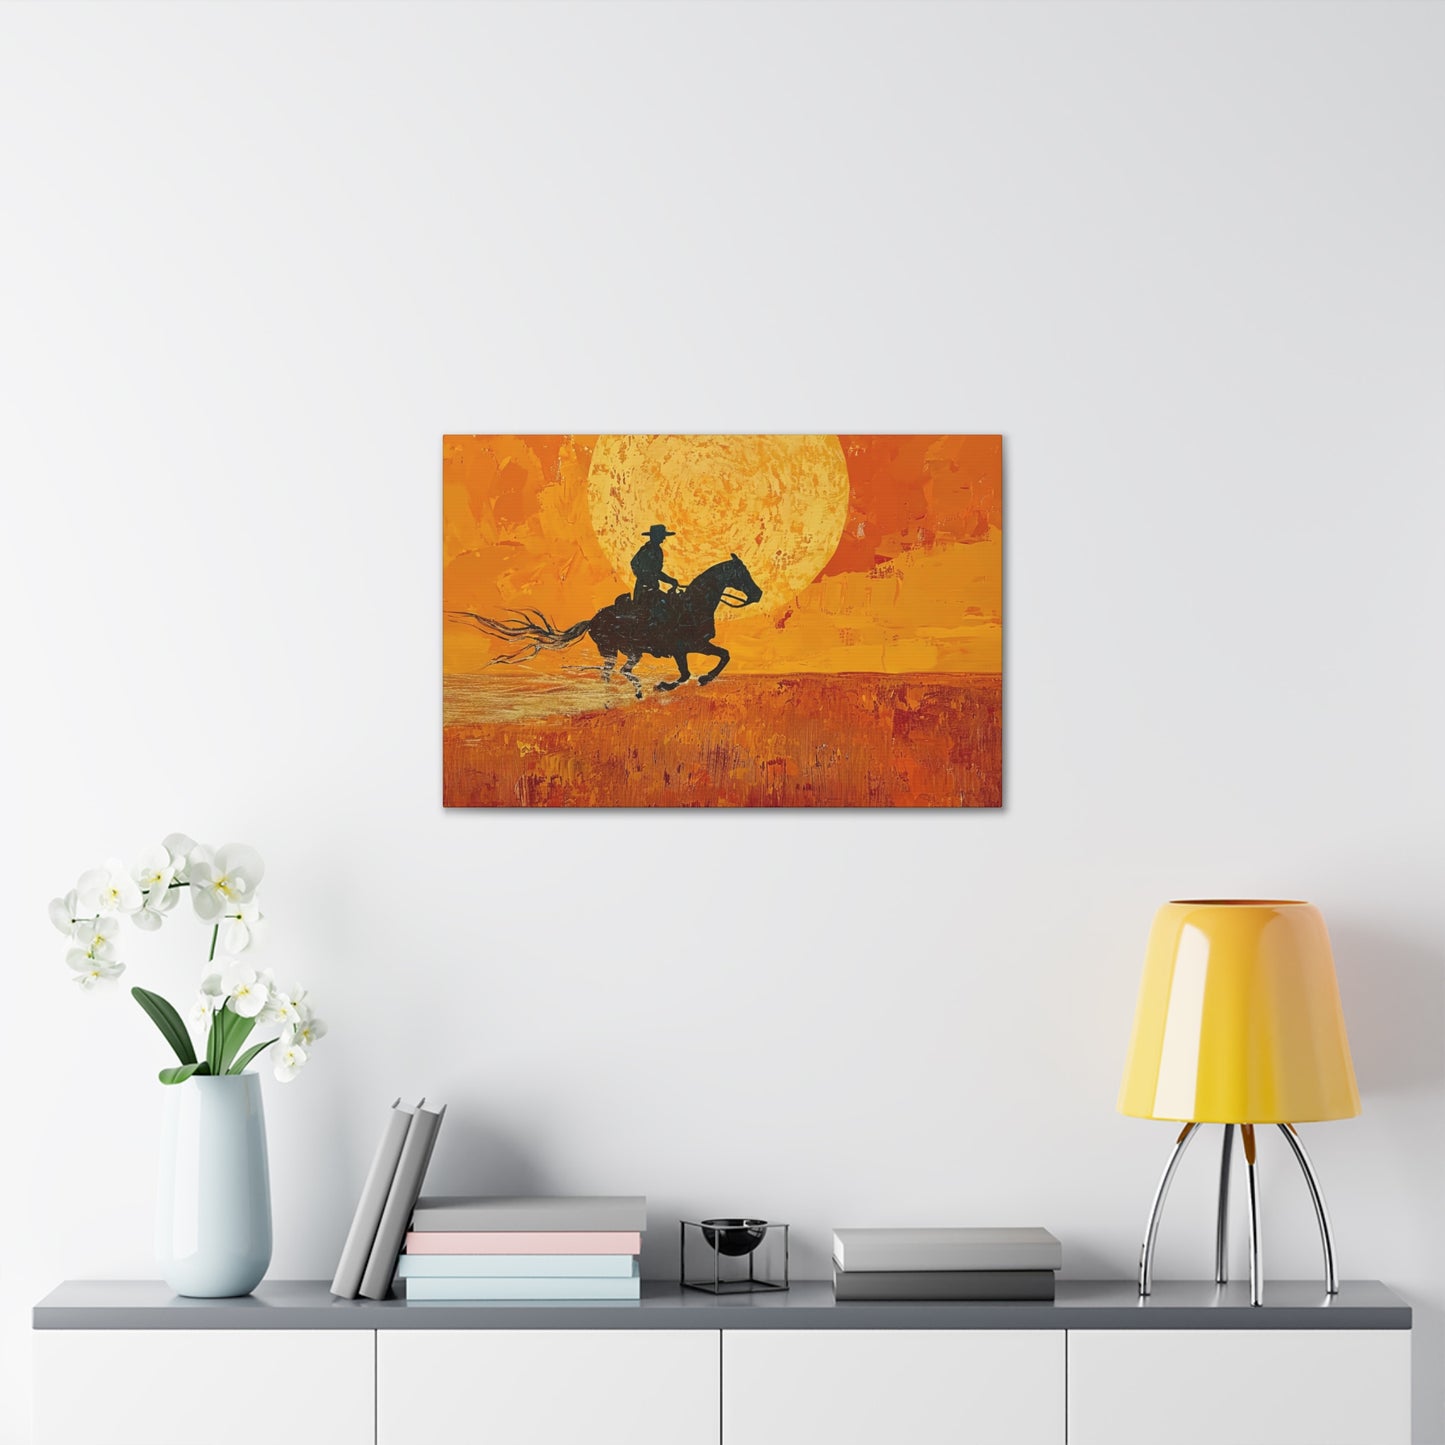 The Rider At Sunset - Canvas Gallery Wraps